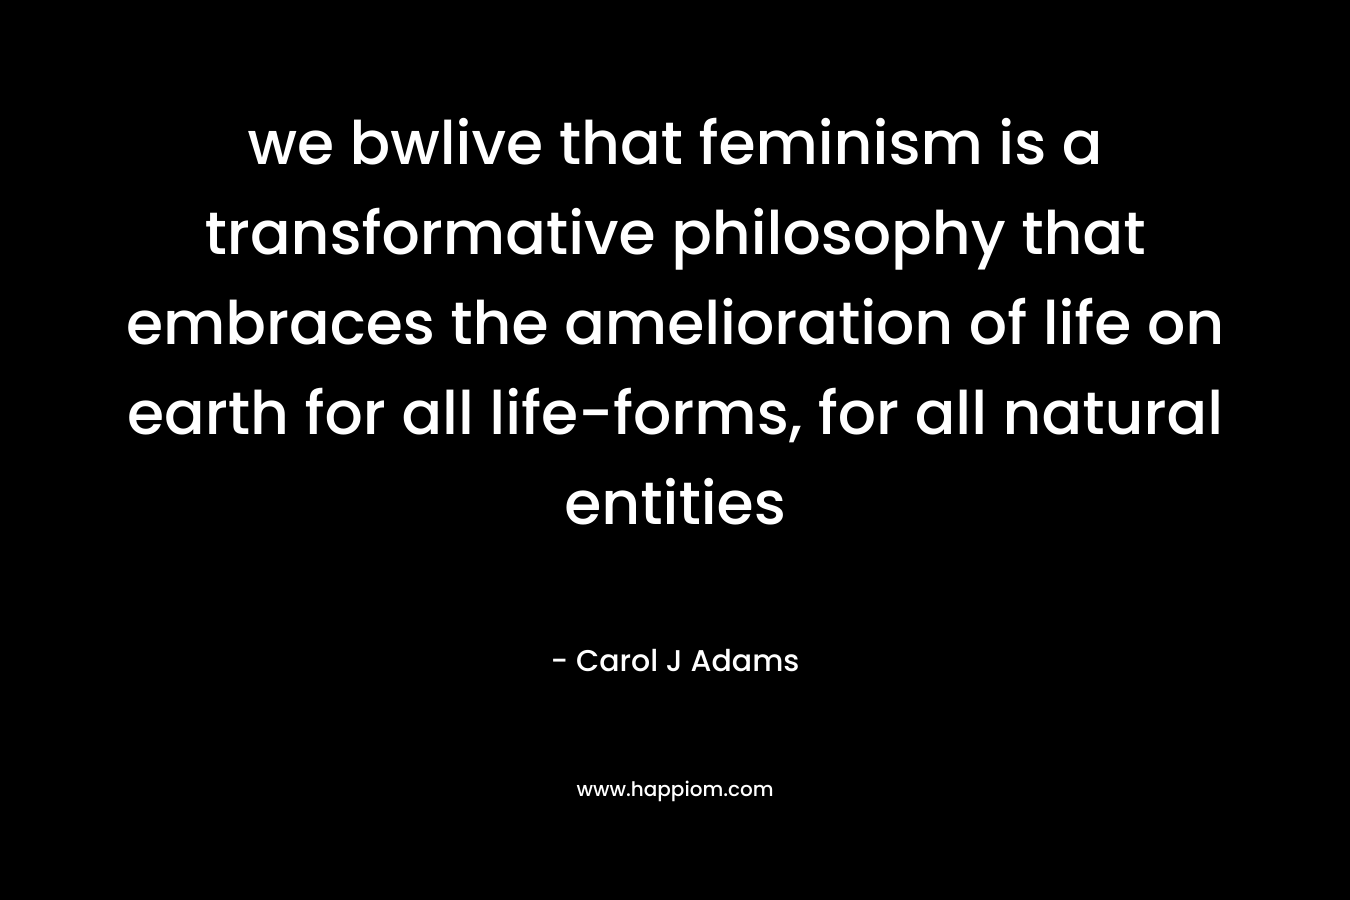 we bwlive that feminism is a transformative philosophy that embraces the amelioration of life on earth for all life-forms, for all natural entities – Carol J Adams